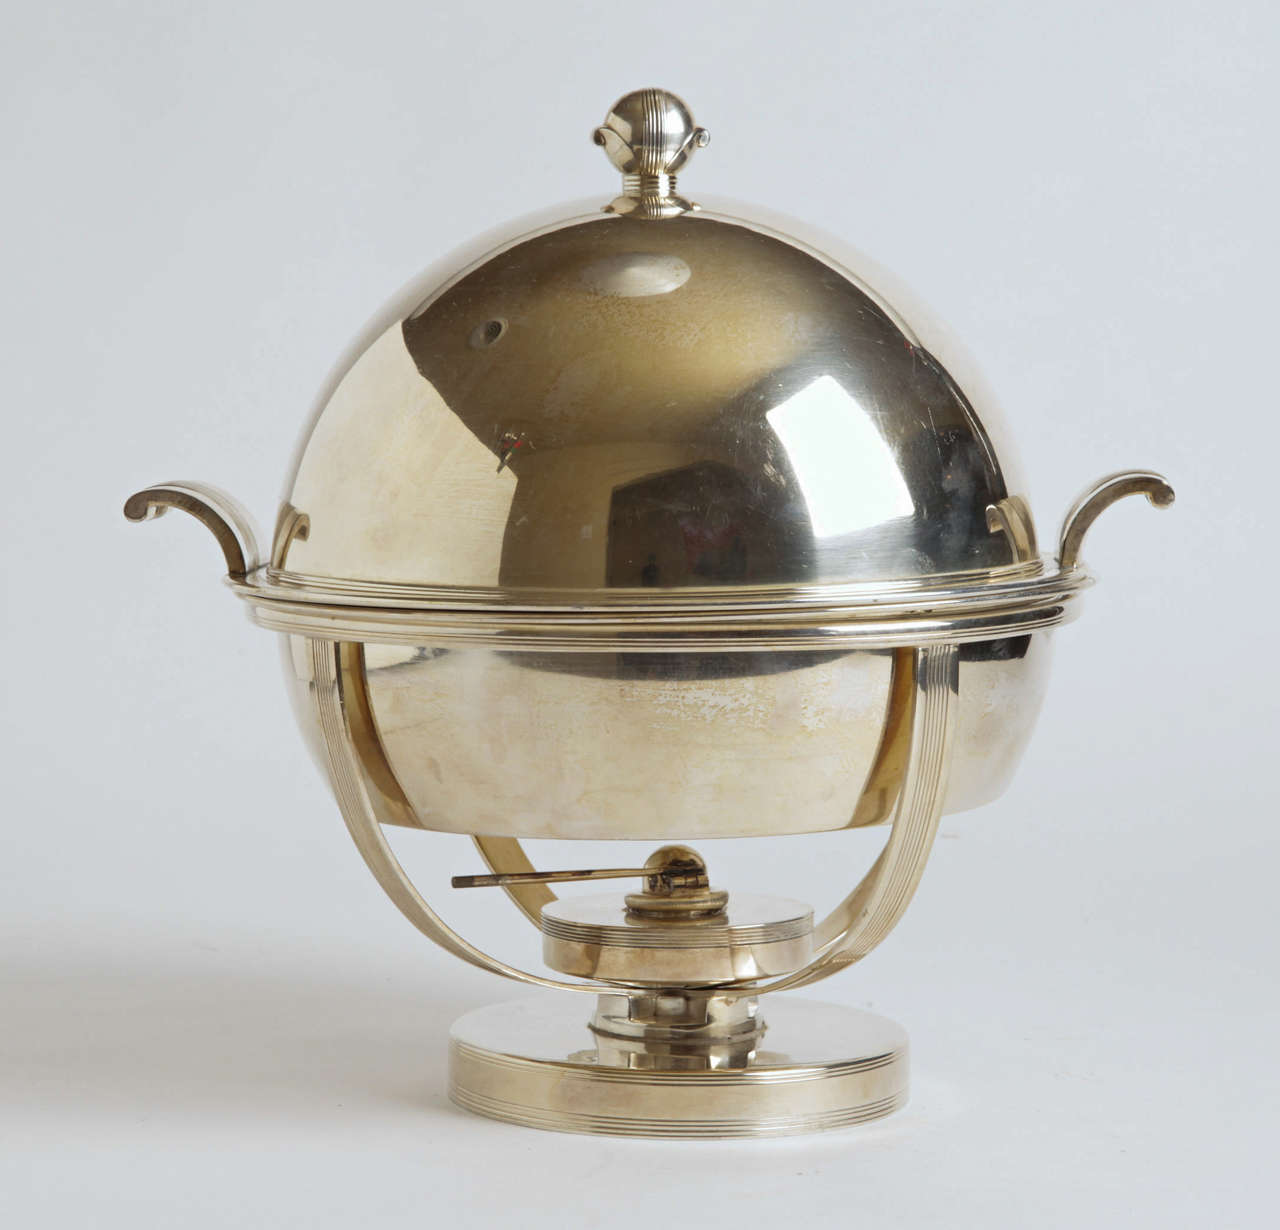 Machine Age Art Deco Chafing Set, Lurelle Guild for International Silver  Rare

This one has all the Iconic Guild International silver-plate elements:
Signature bud finial, incised horizontal lines, curved speed handles and Saturn frame. 
Comprising